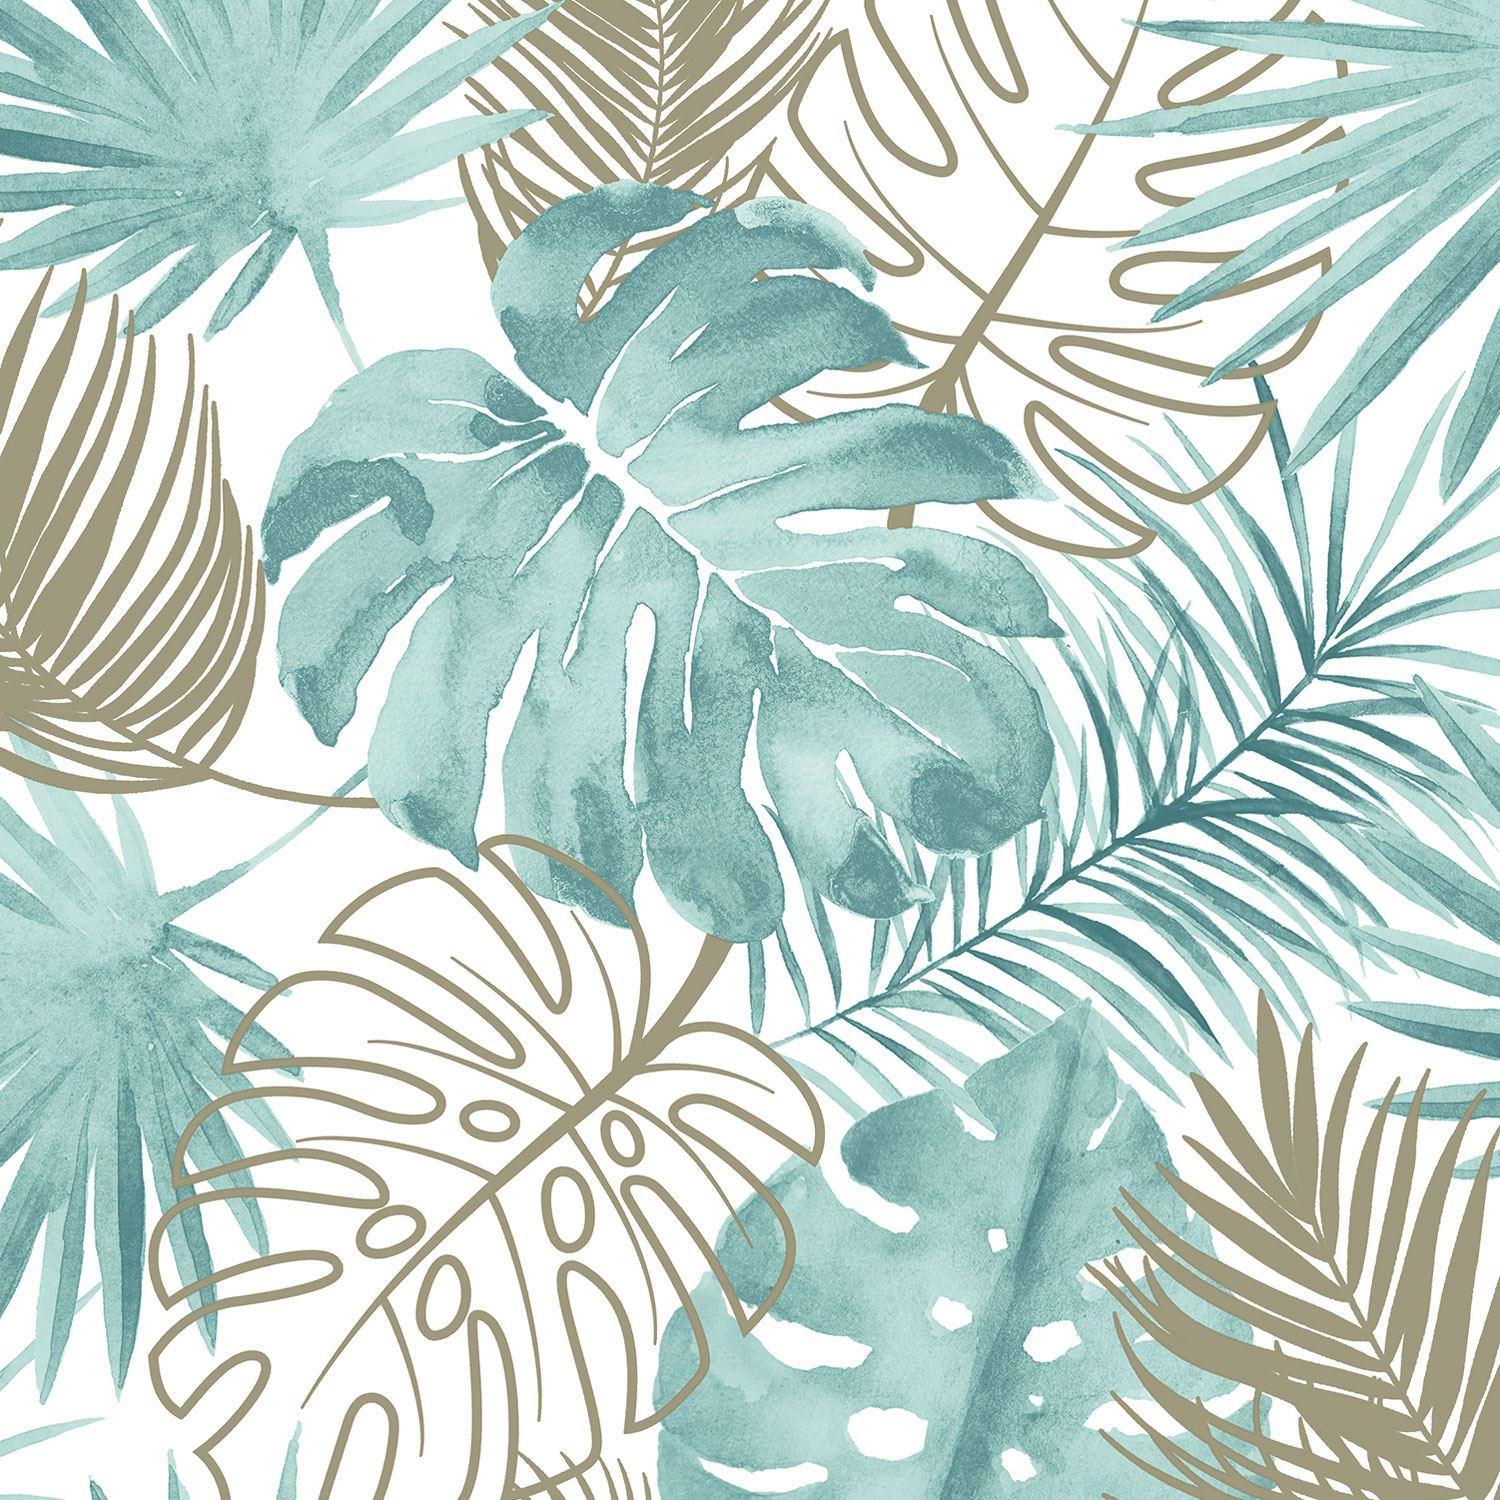 Iphone Palm Leaves Wallpapers